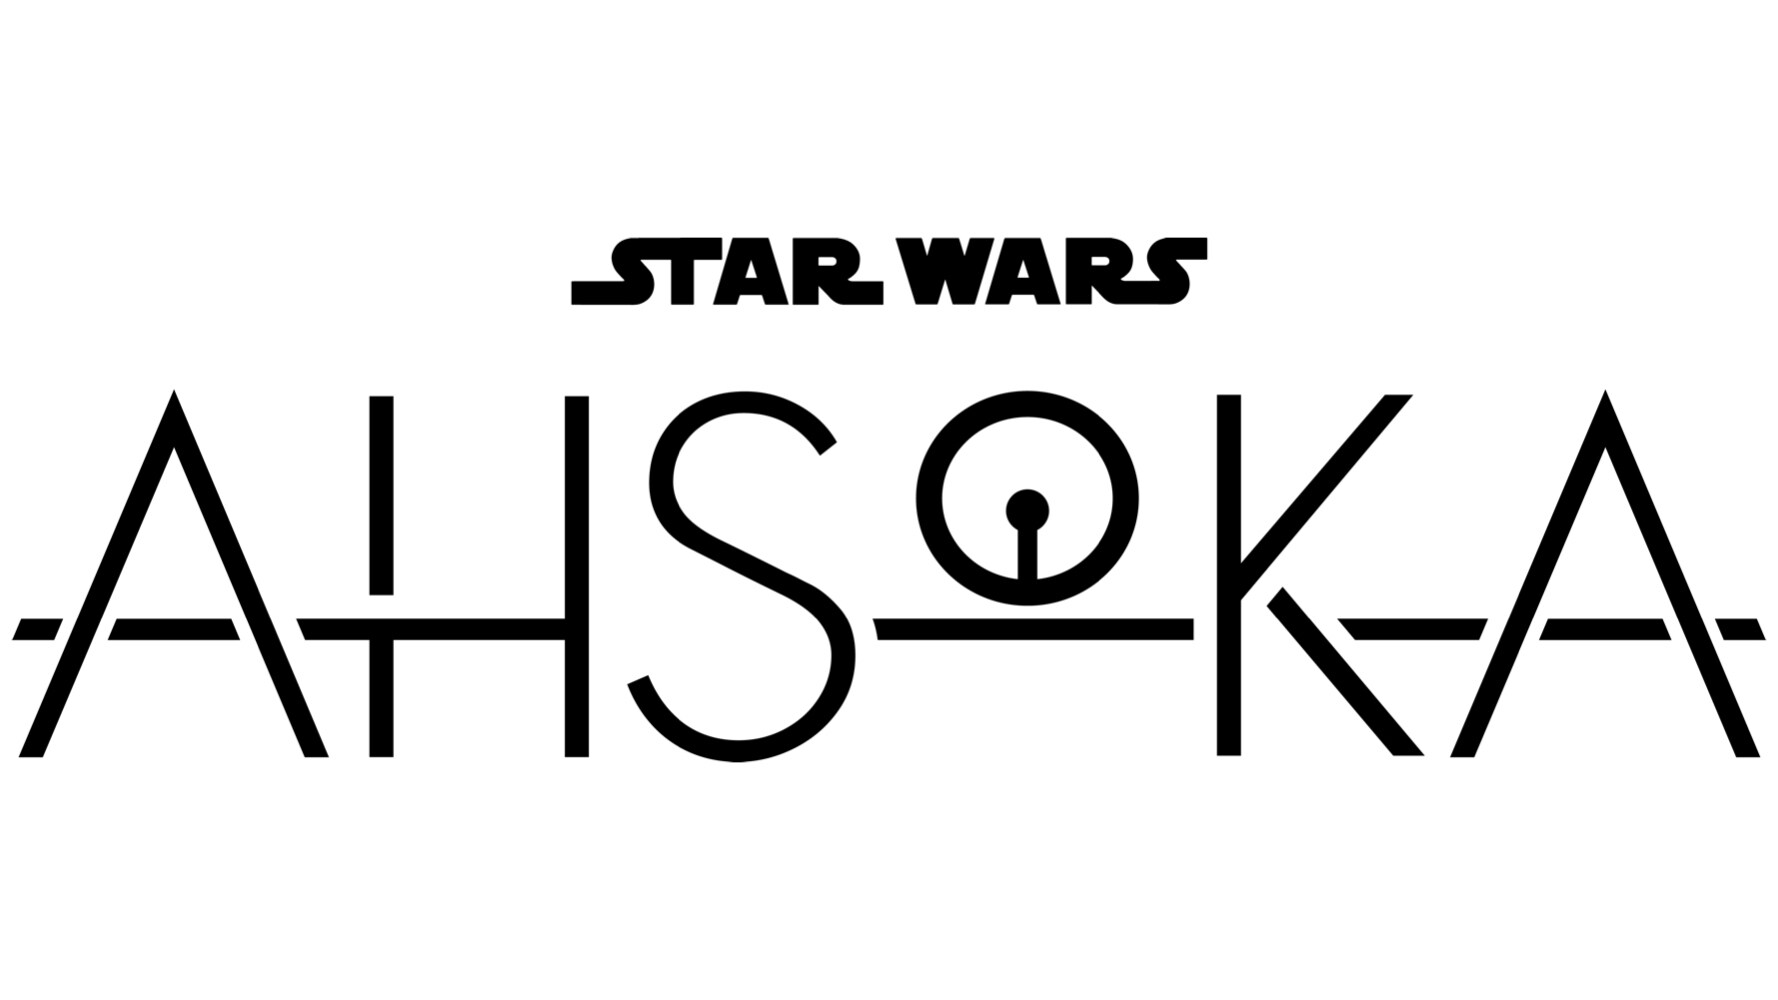 Disney+ Subscribers Will Receive Special Access To “Star Wars: Ahsoka” Merchandise When Series Premieres On August 23